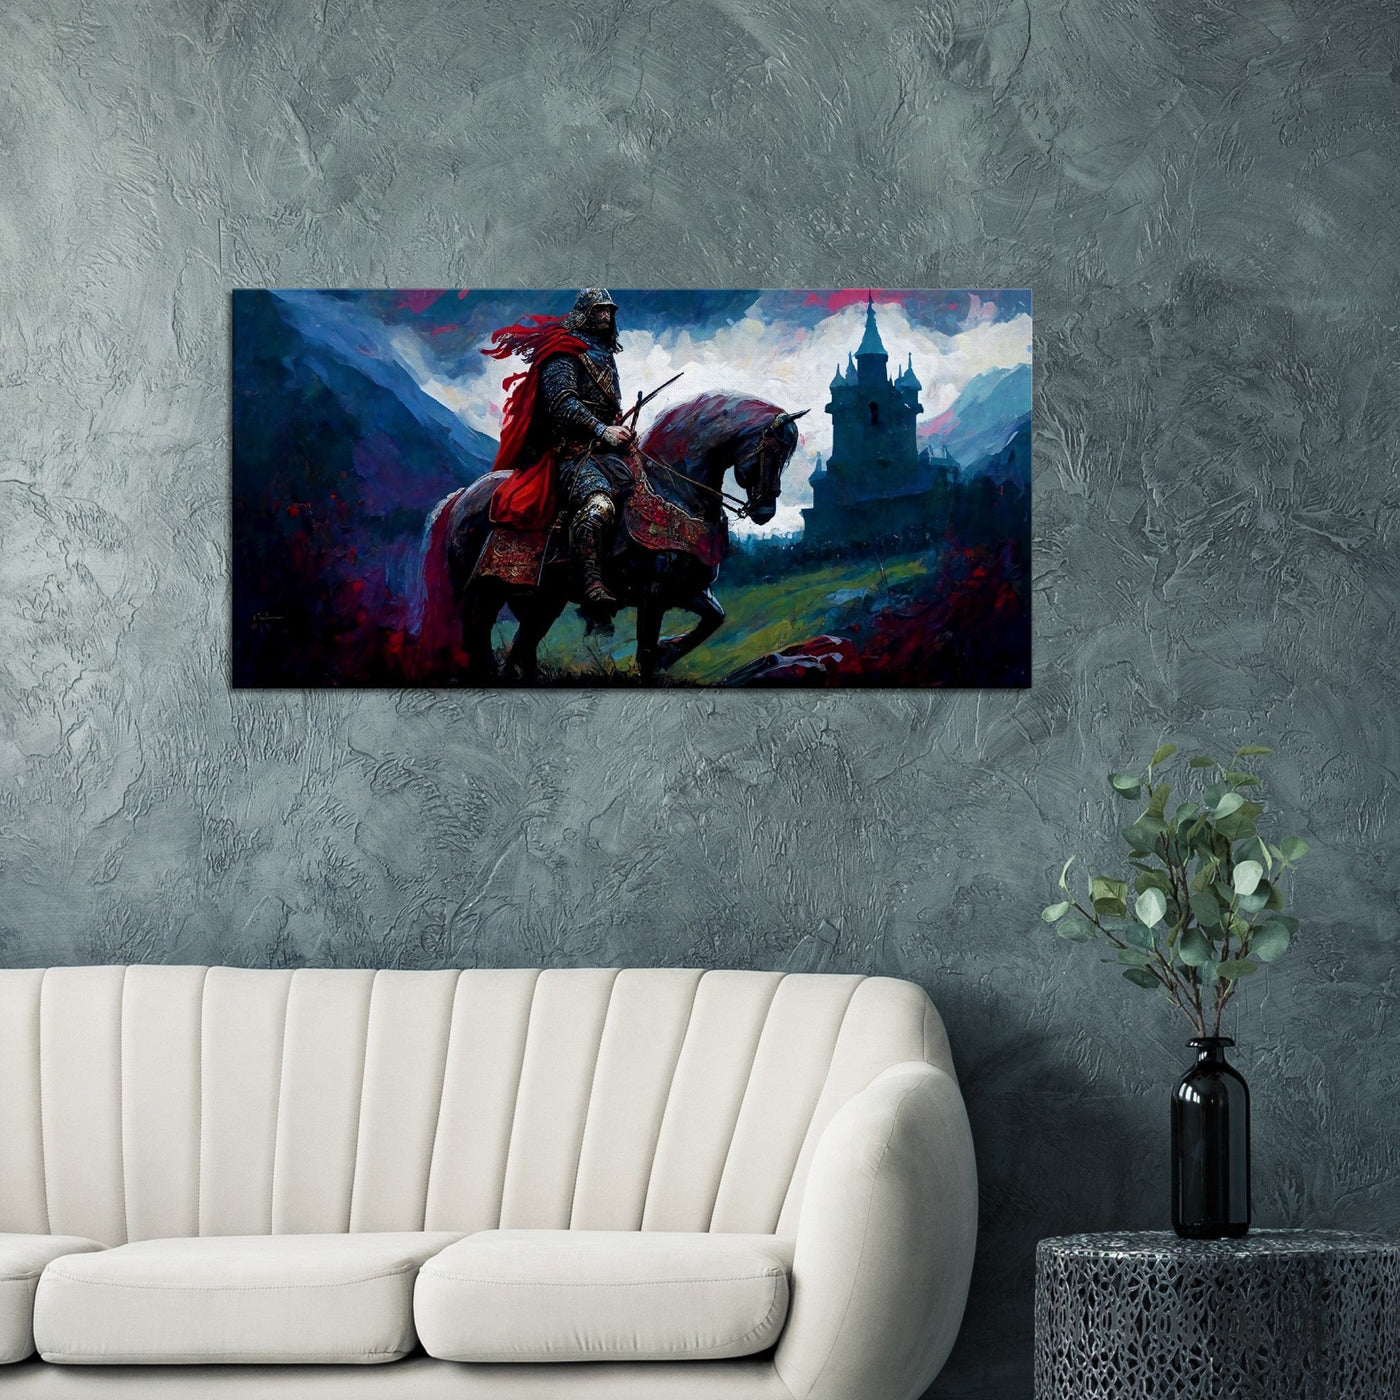 The King of Camelot - Oil Painting Printed Canvas. 50X100.